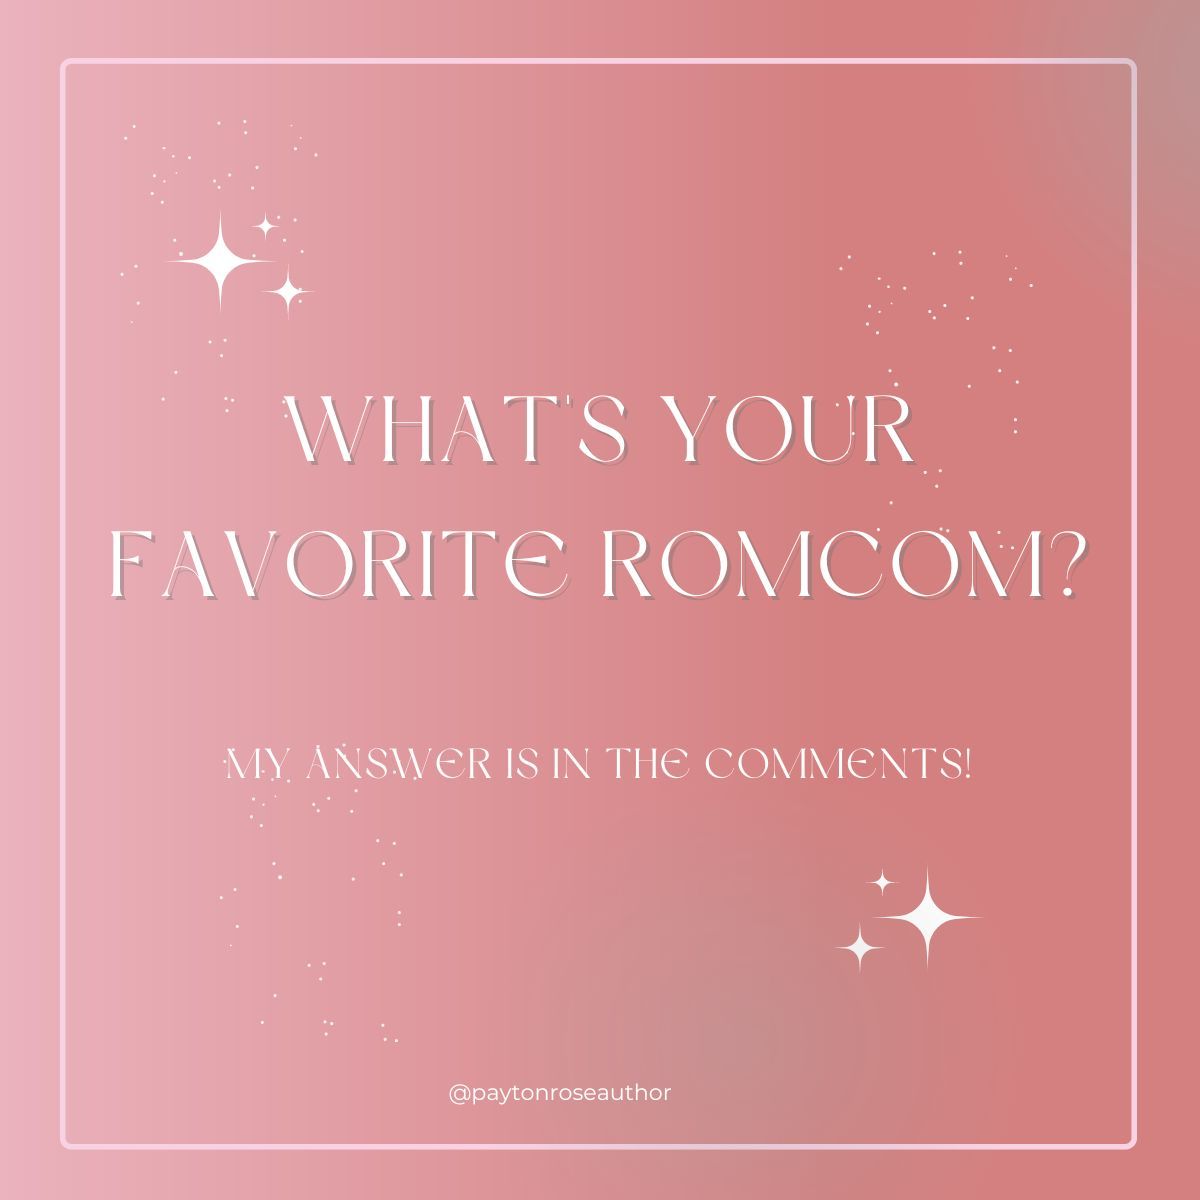 I actually haven't read any rom coms out but I want to try reading Exes & O's by Amy Lea! Tell me your favorite rom con in the comments!
#booktok #indieauthor #favoriteauthor #bookstagrammer #fantasyauthor #authortok #authorgram #fantasybooks #booksandcoffee #cozyreading